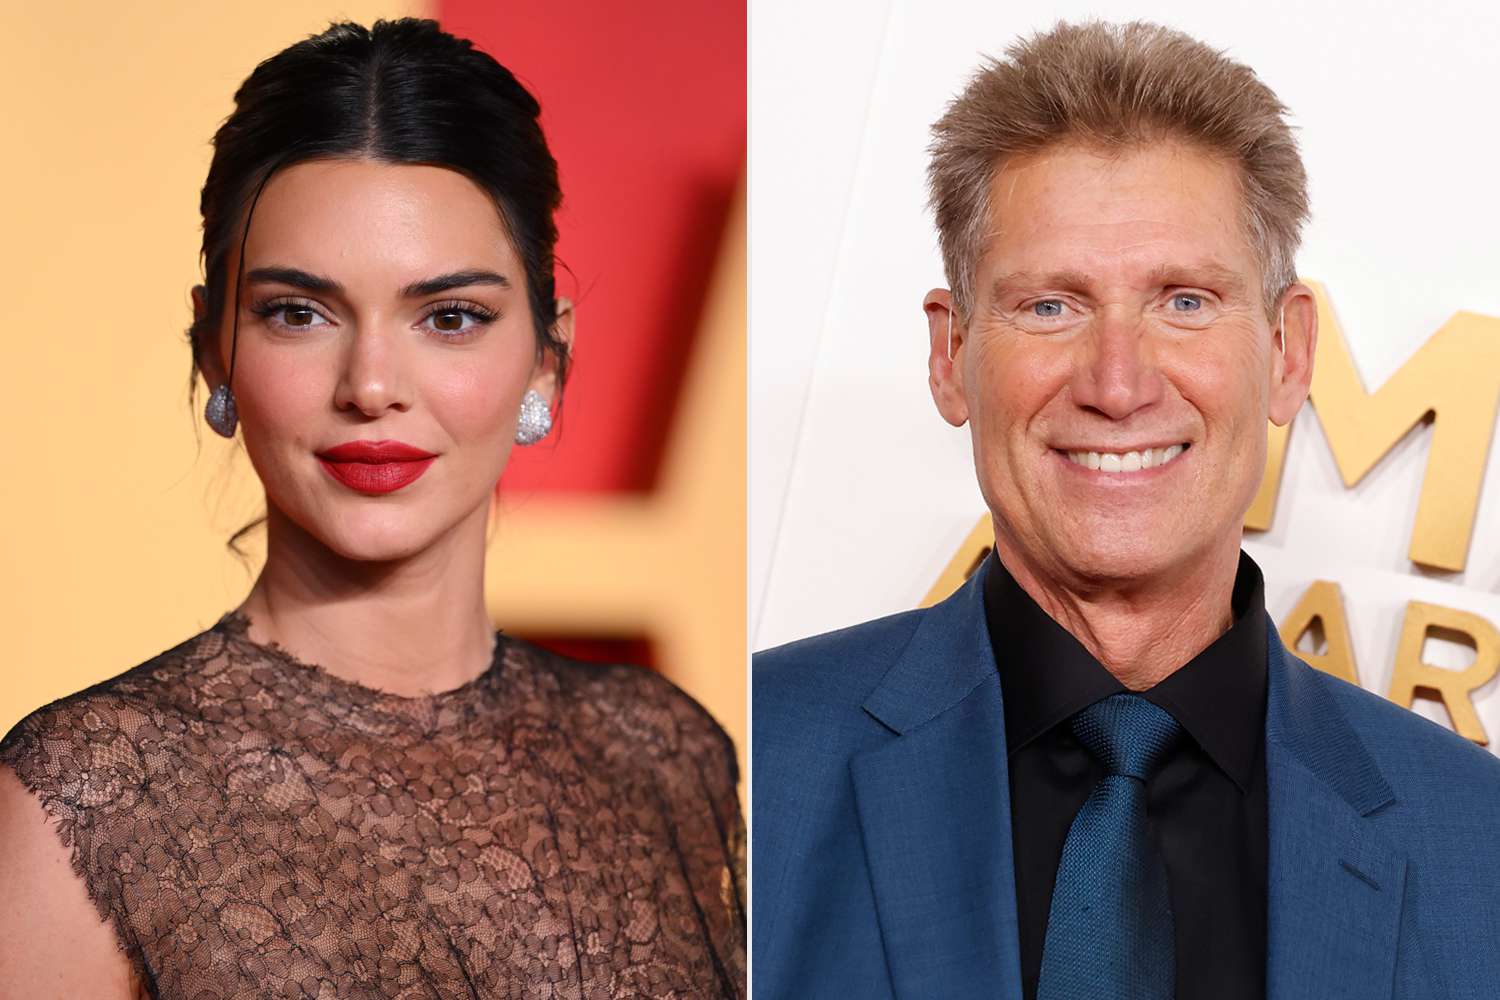 Kendall Jenner Saw Things She 'Shouldn't Have' on Golden Bachelor Gerry Turner's Phone